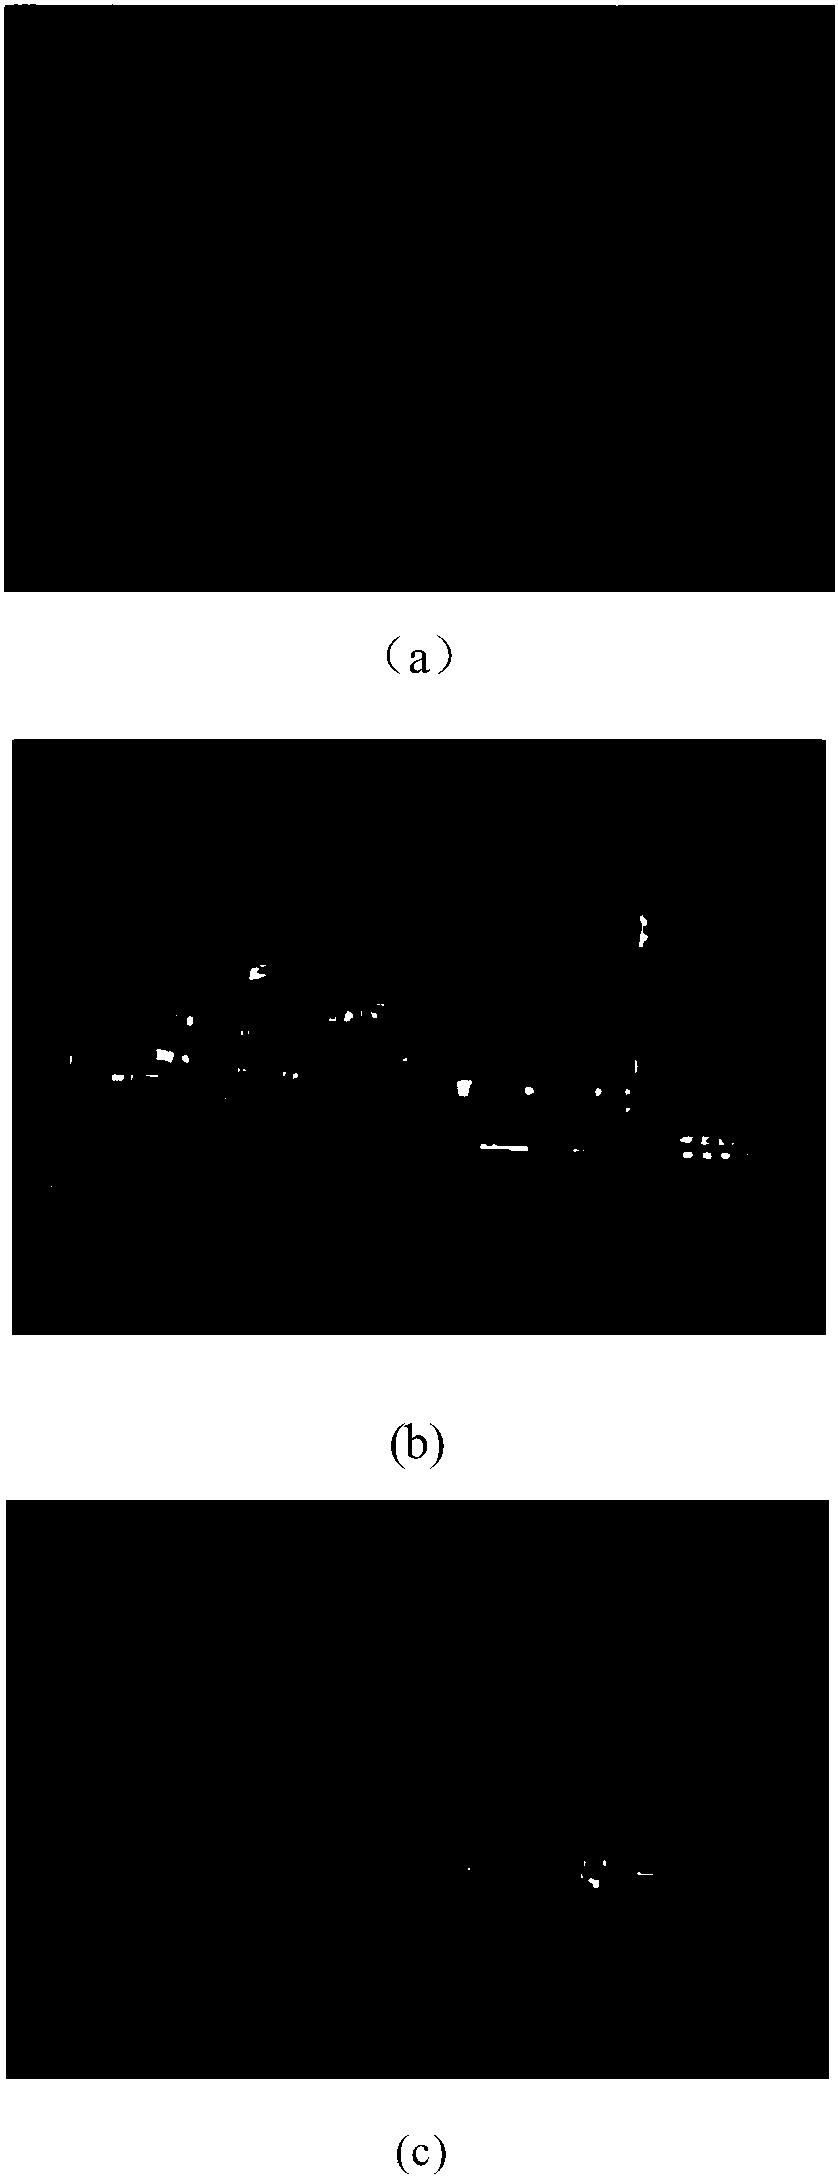 Method for enhancing low-light video image based on space-time accumulation and image degradation model